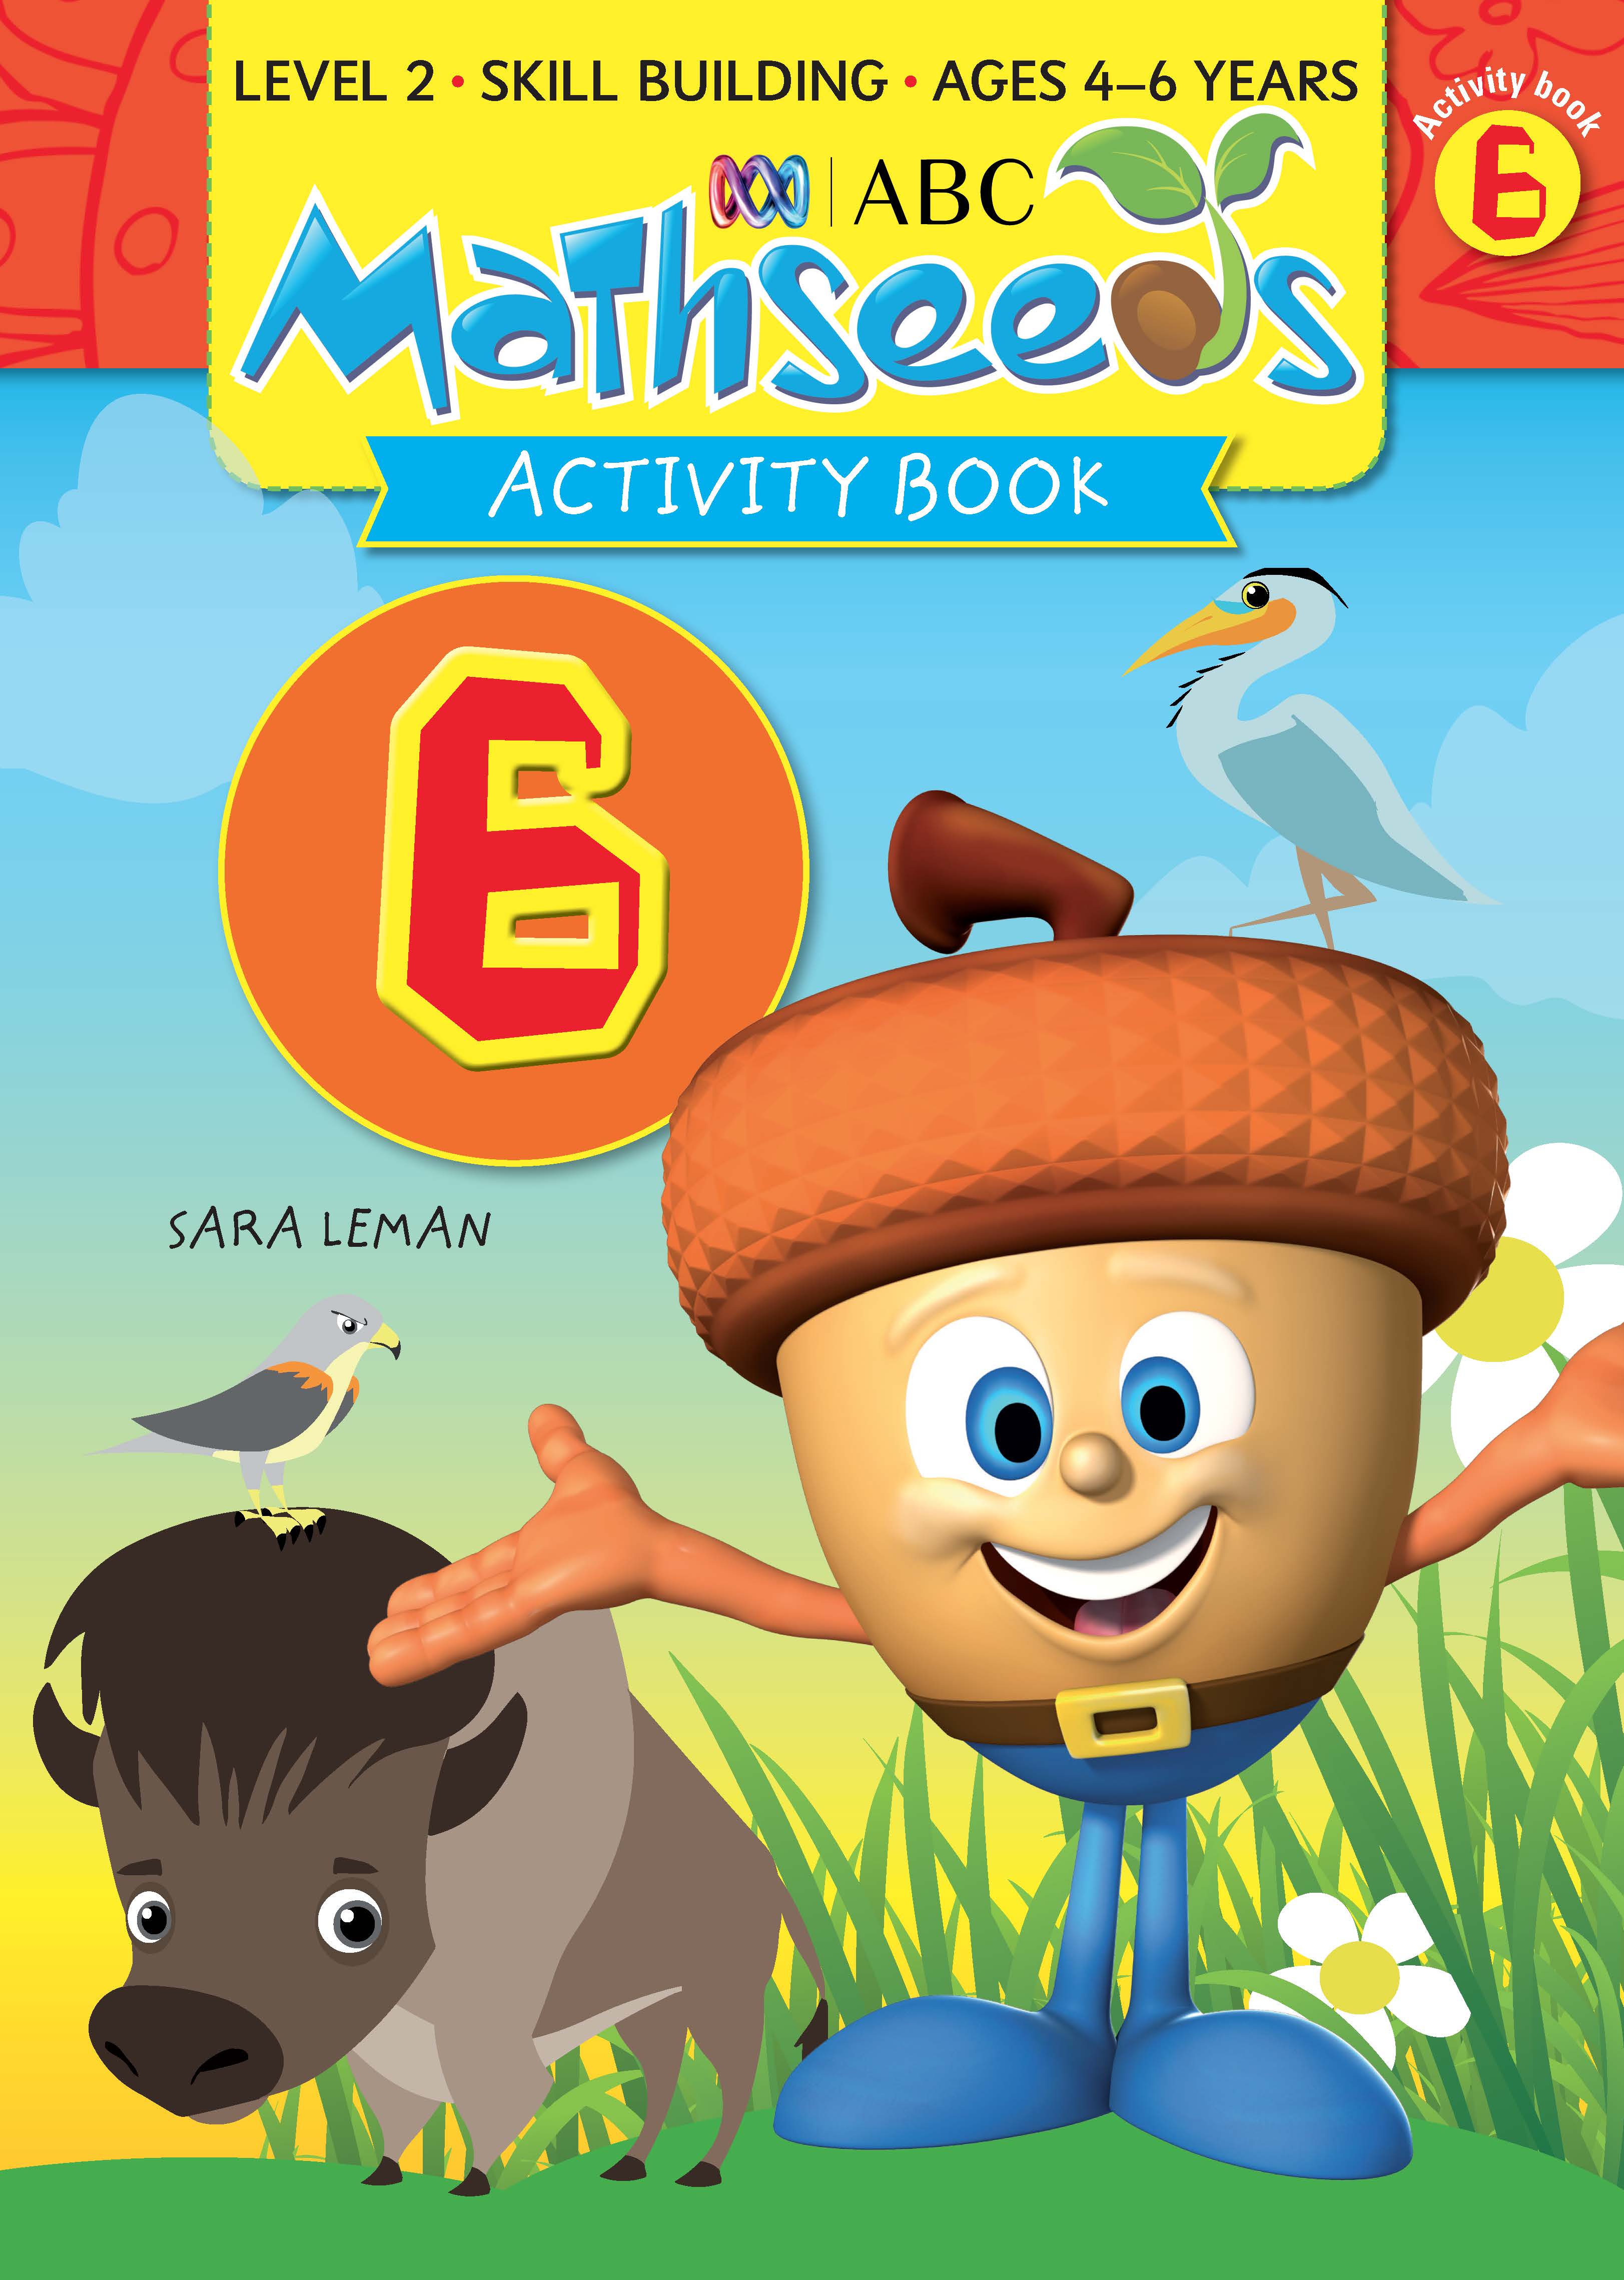 Picture of ABC Mathseeds Activity Book 6 Level 2 Ages 4-6